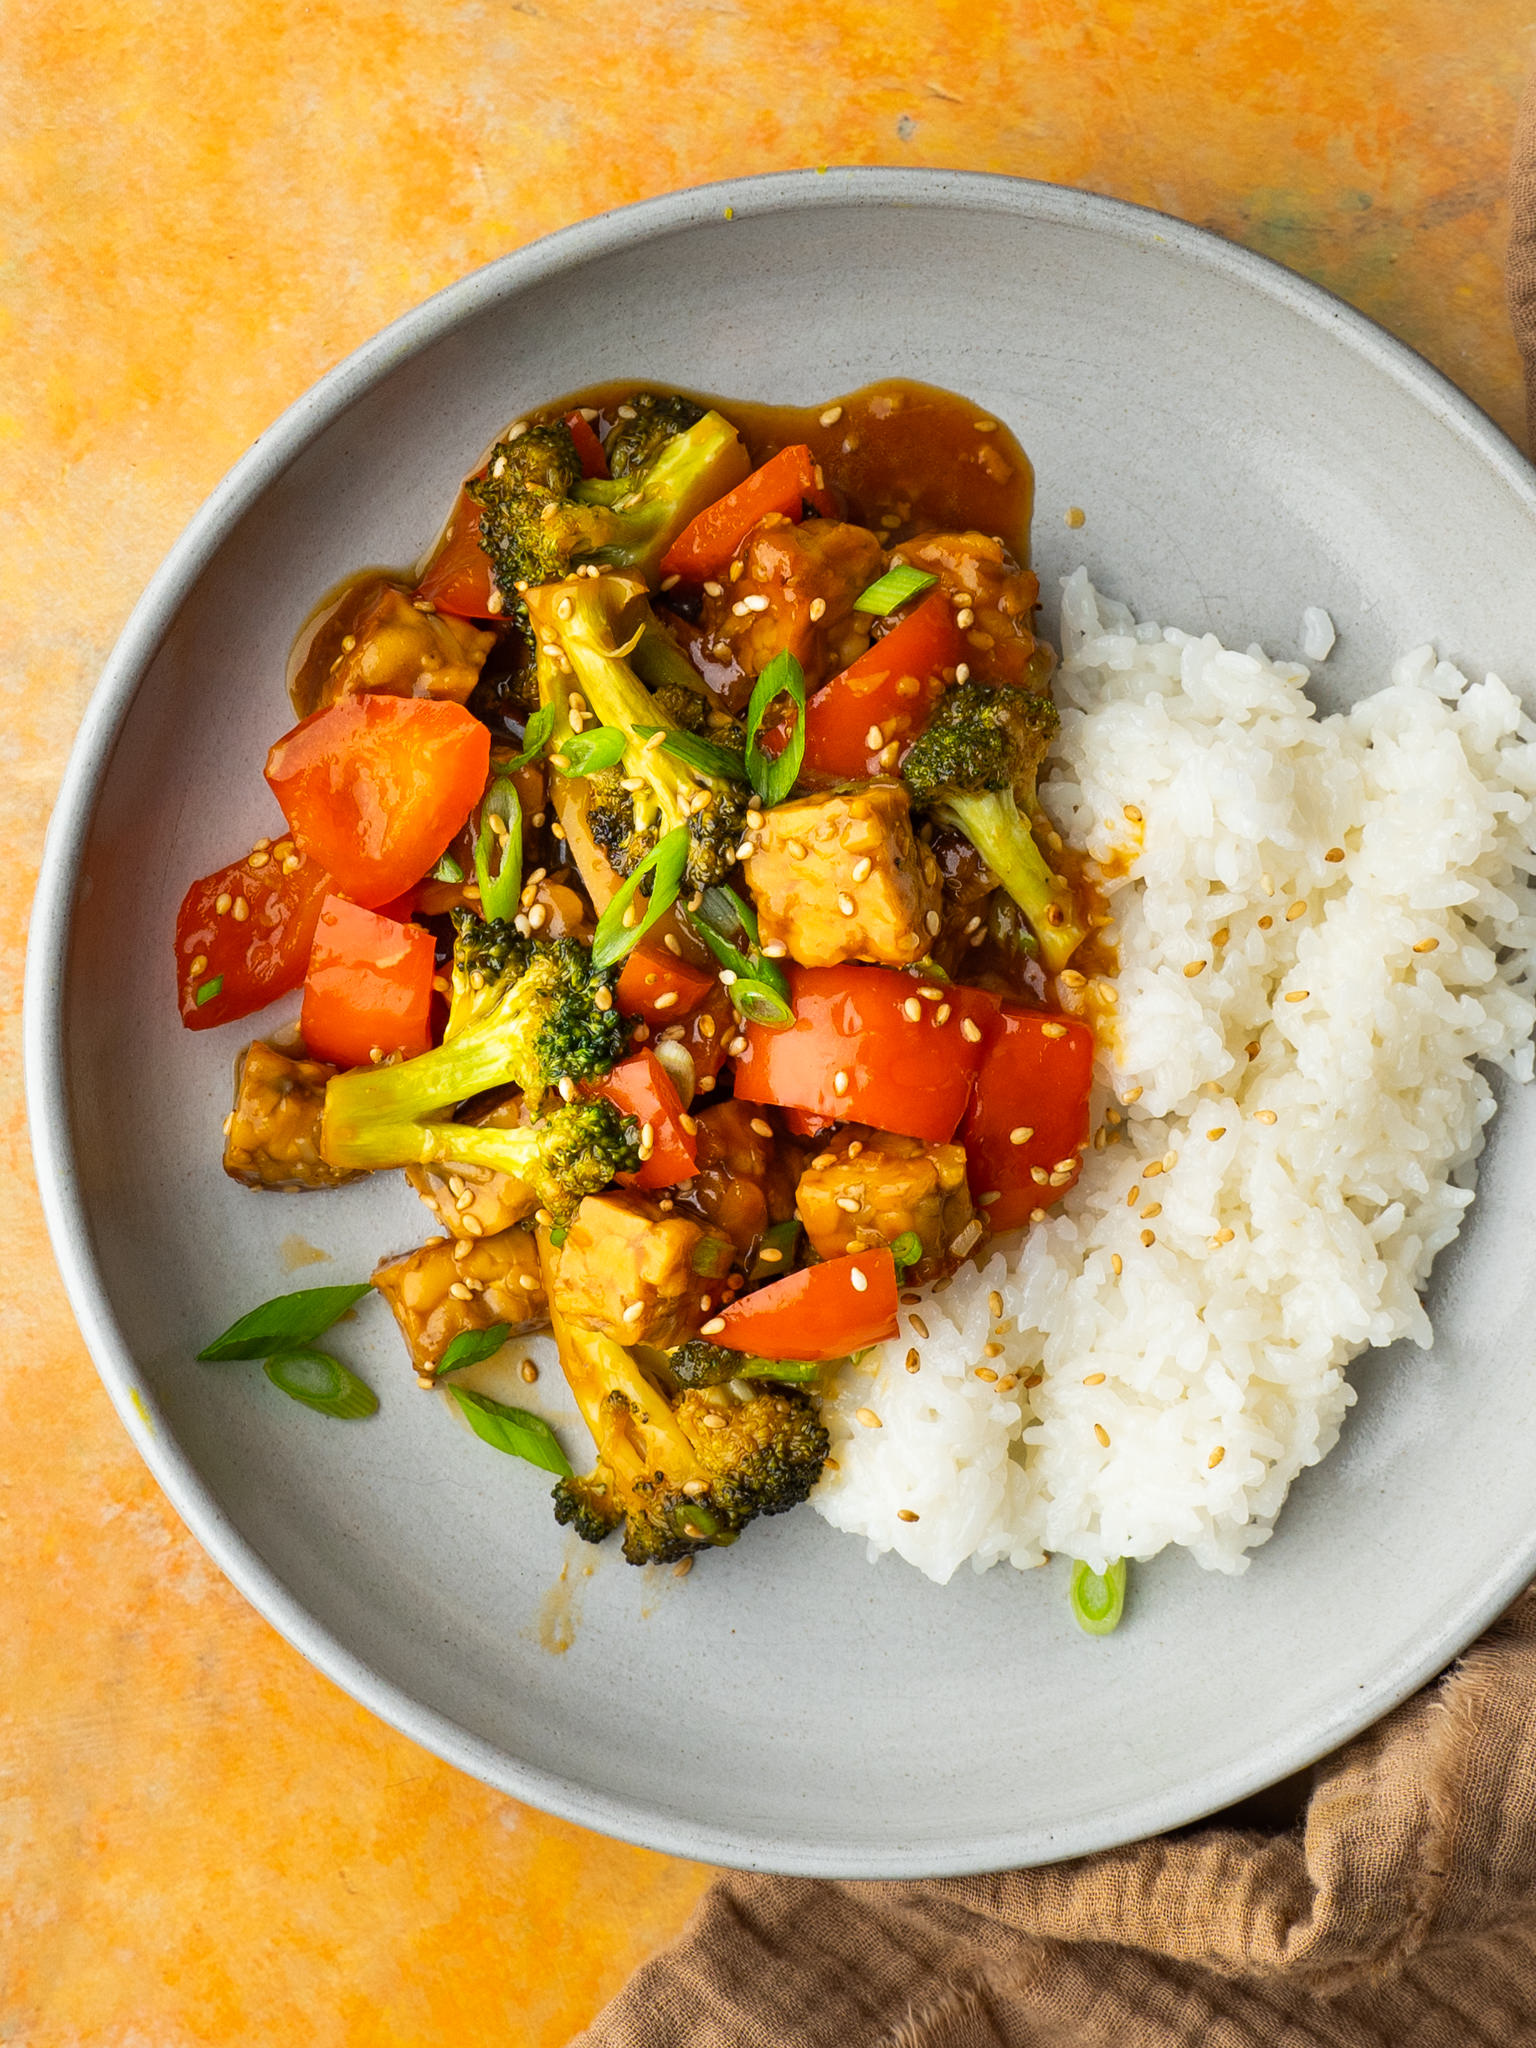 A stir fry with broccoli and peppers is on a plate with a scoop of white rice next to it. The dish is garnished with sesame seeds.